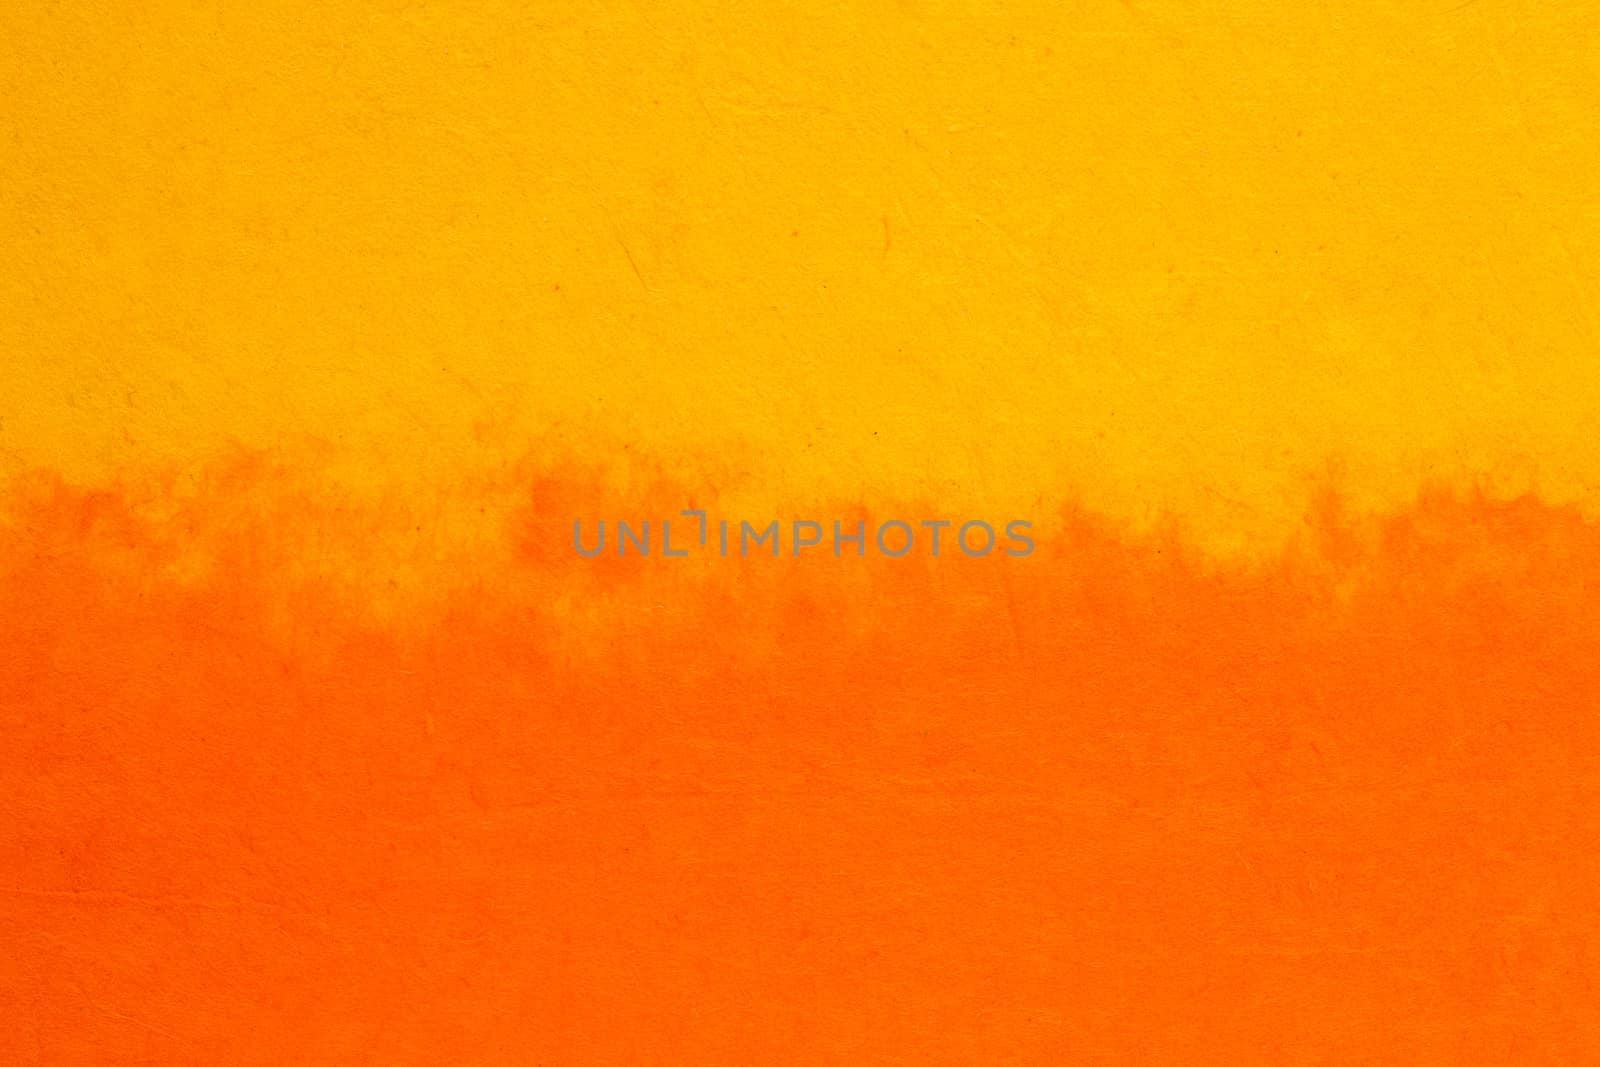 old orange and yellow background paper texture